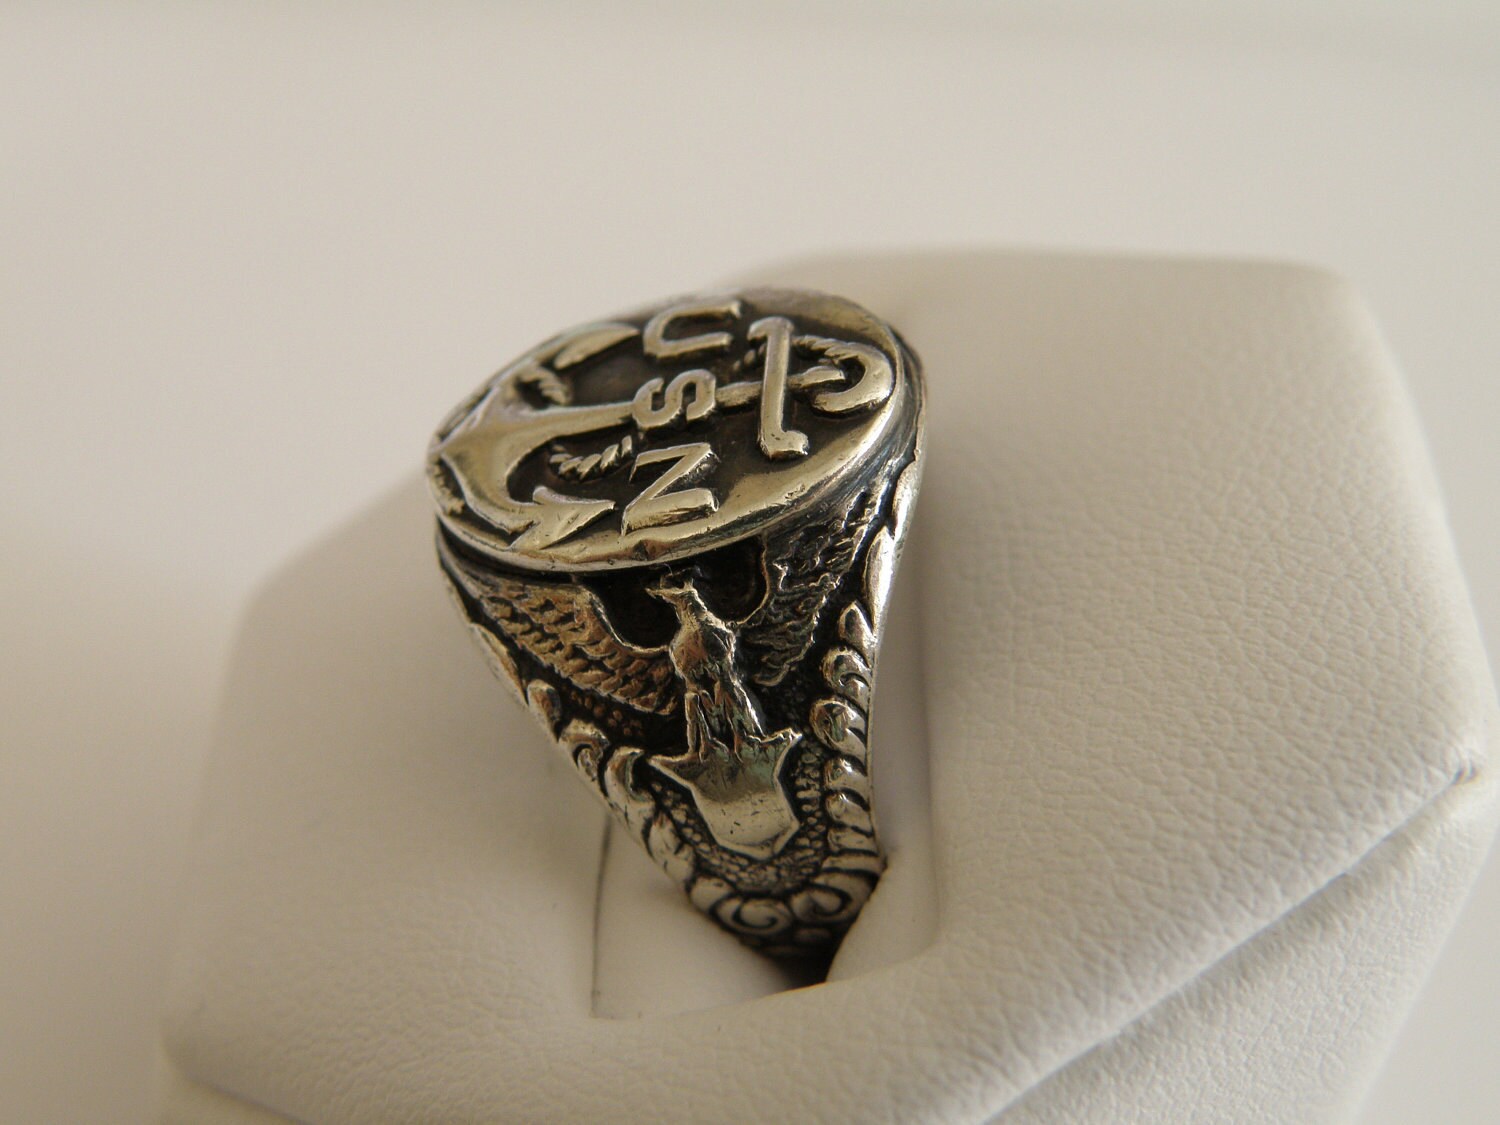 Antique Sterling Silver U.S. Navy Ring Size 5 1/4 U.S.